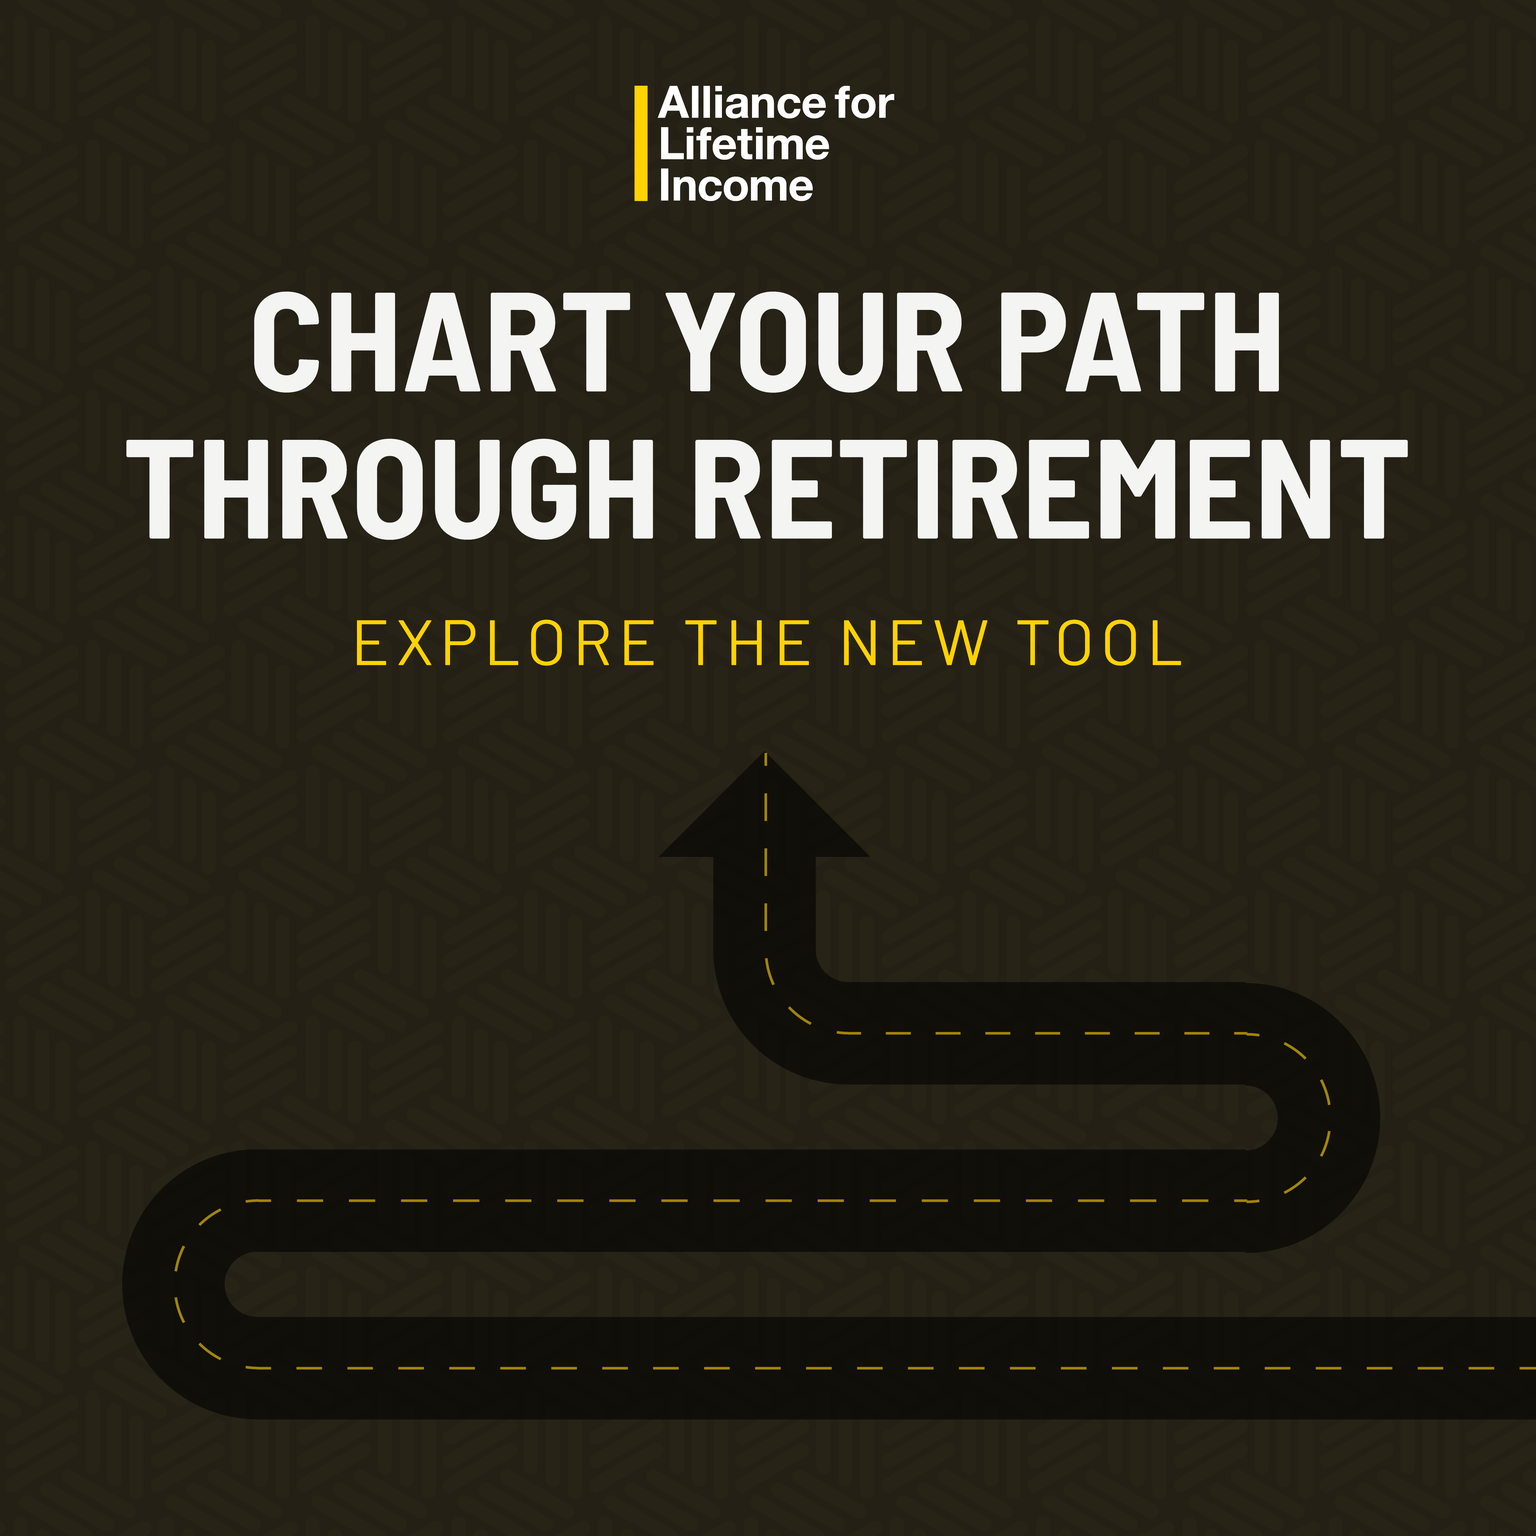 Today's 'No Normal' Retirement Journey Mapped Out